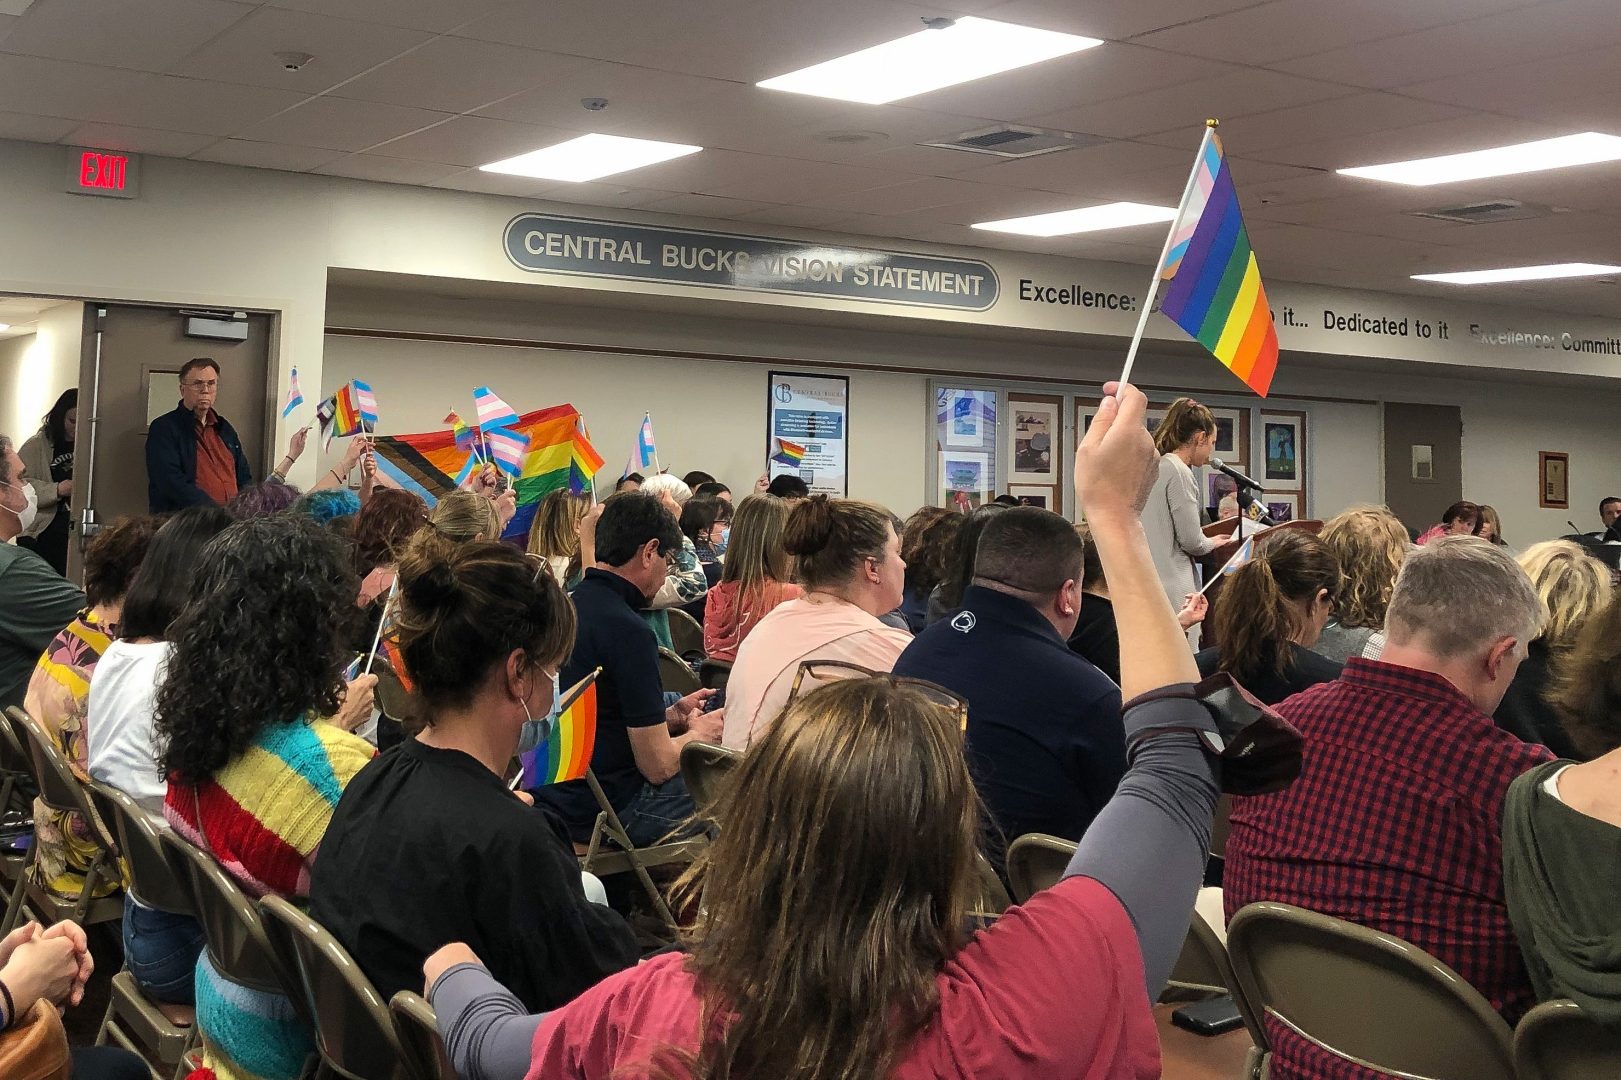 Parents and students waved LGBTQ pride flags in the air as Lena Barnhat of Doylestown said schools should not be a place for promoting sexuality.